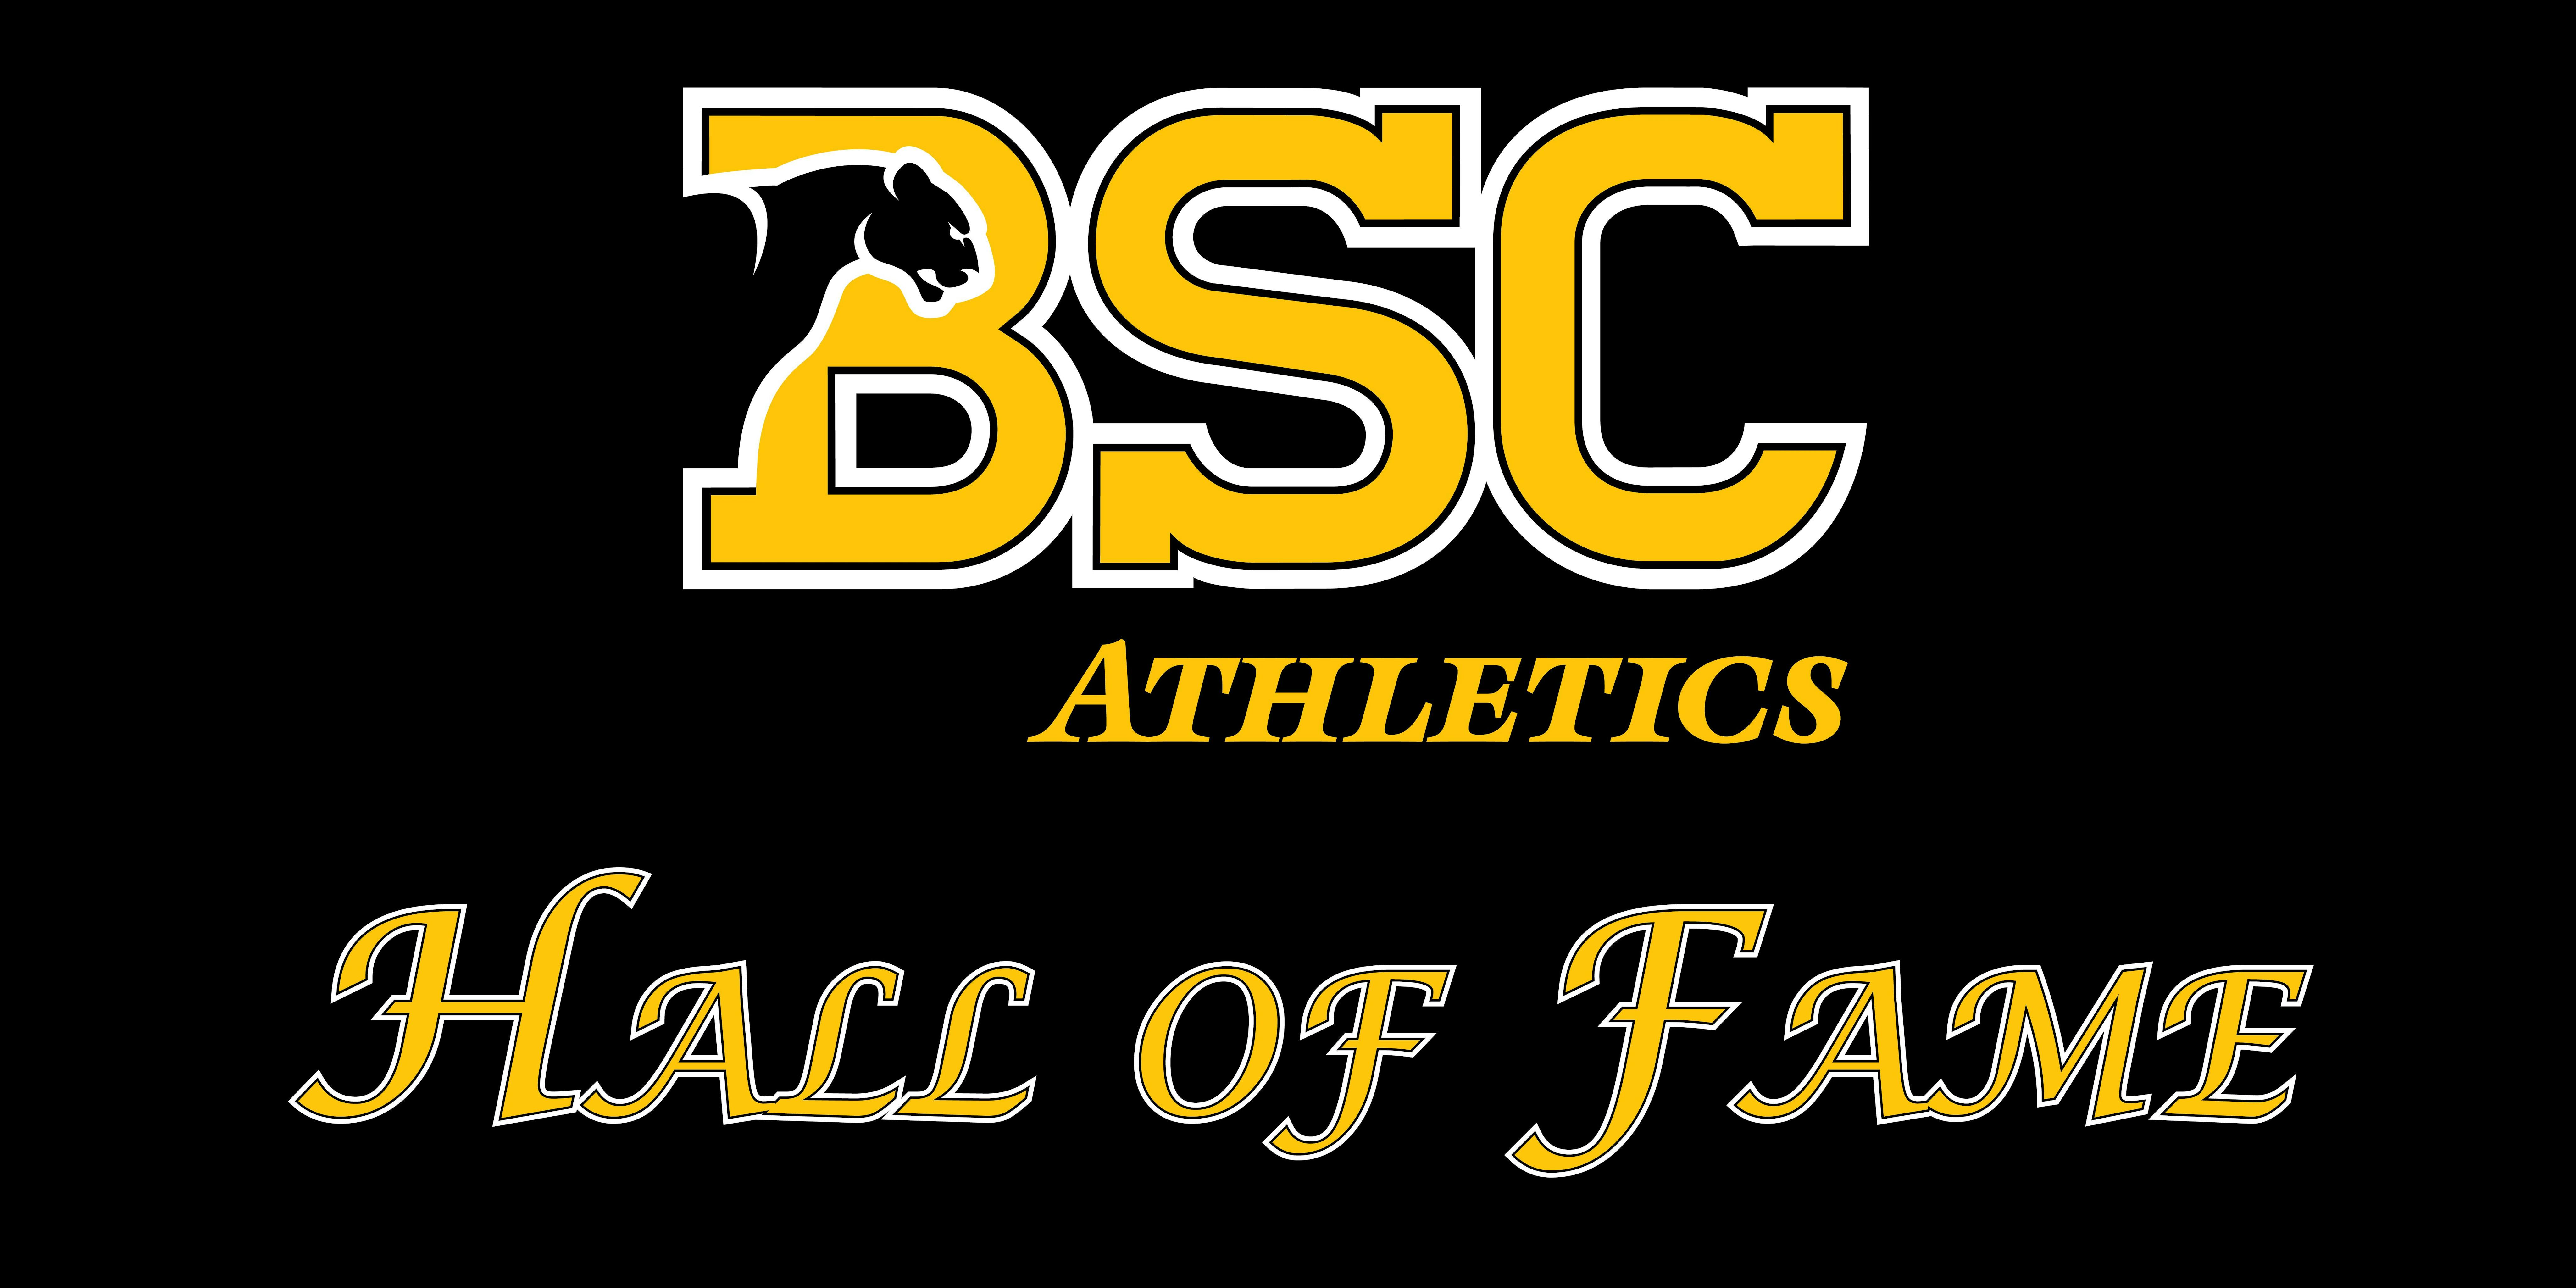 38th Birmingham-Southern College Athletics Hall of Fame Induction